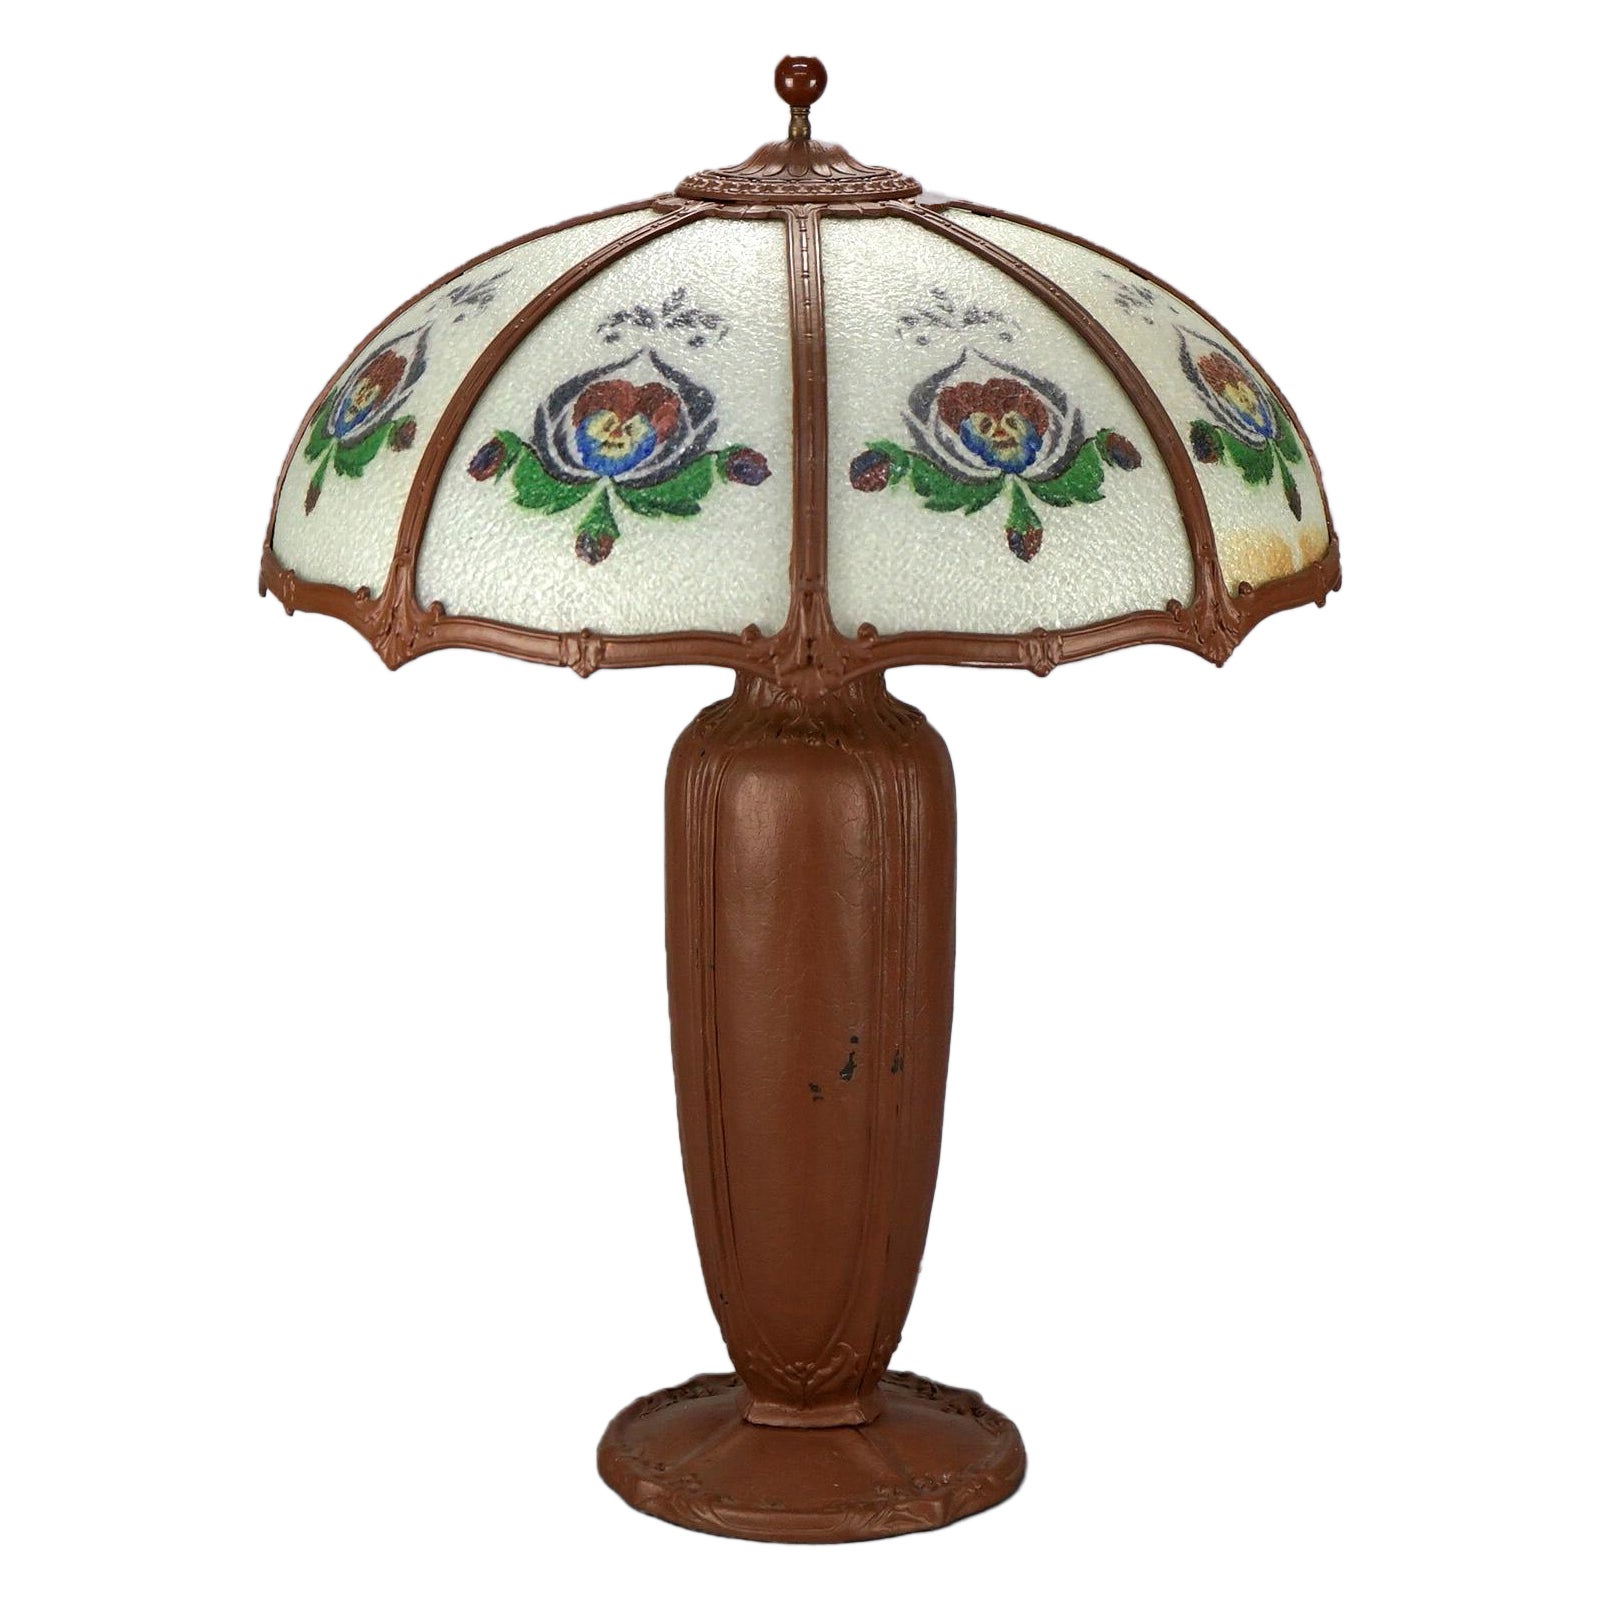 When were Bradley and Hubbard lamps made?